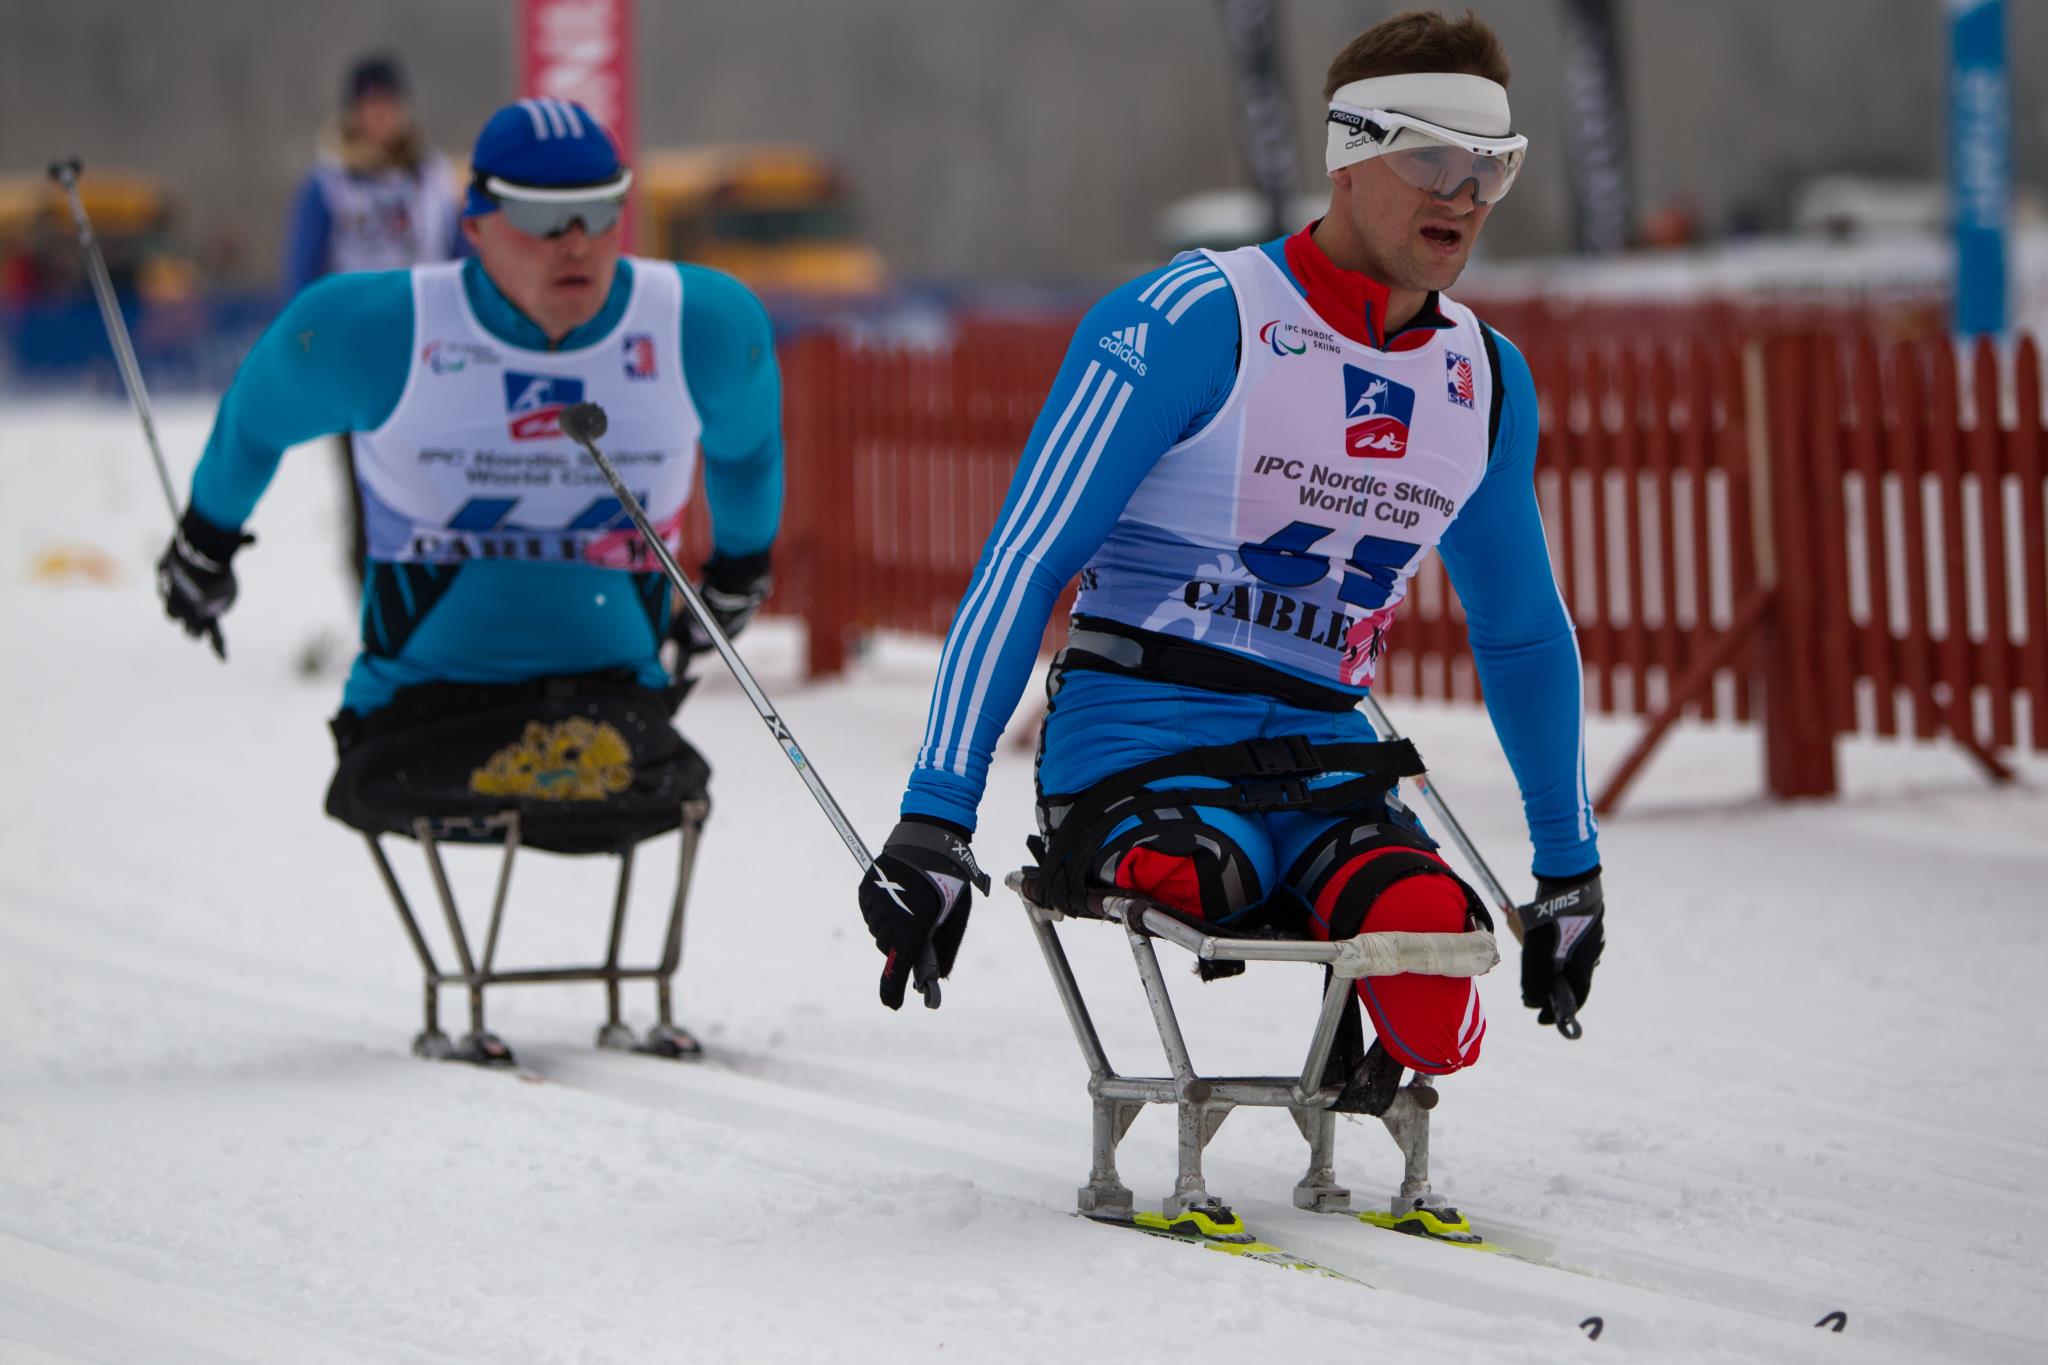 The rivalry between Russian sit-skiers Irek Zaripov and Roman Petushkov will be one to look out for at the IPC Nordic Skiing World Championships